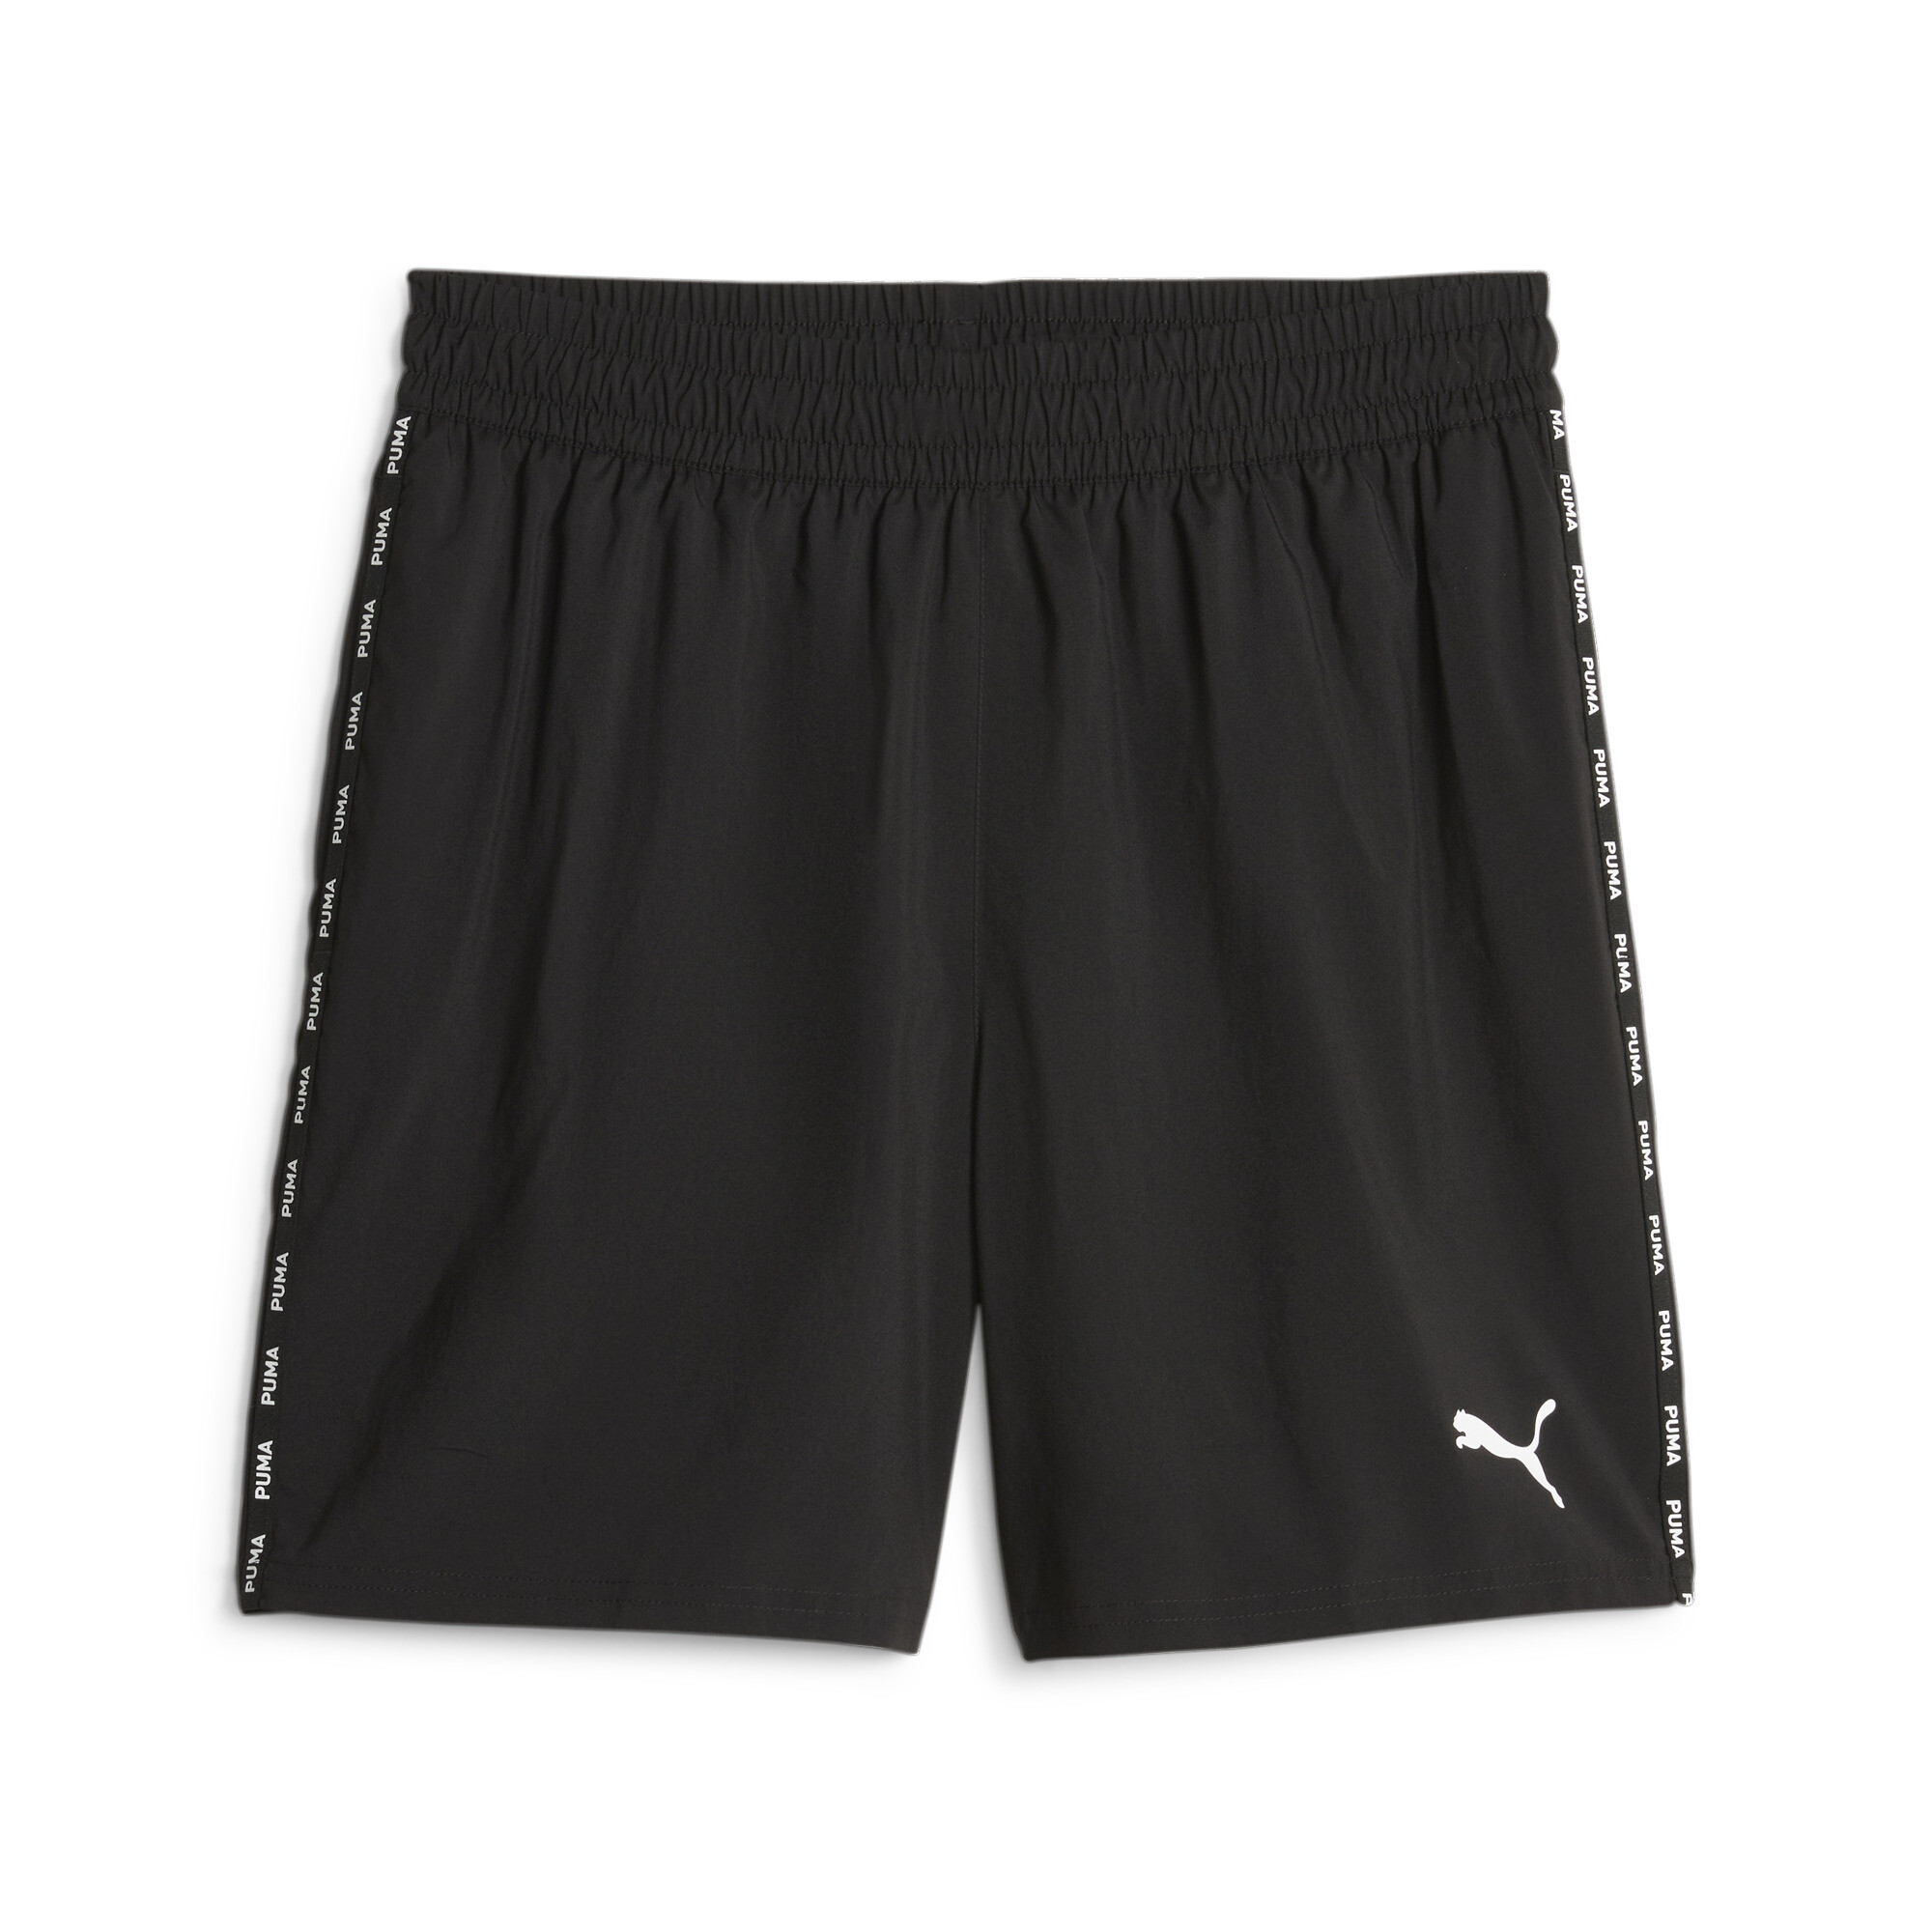 Men's PUMA Fit 7 Training Shorts In Black, Size Small